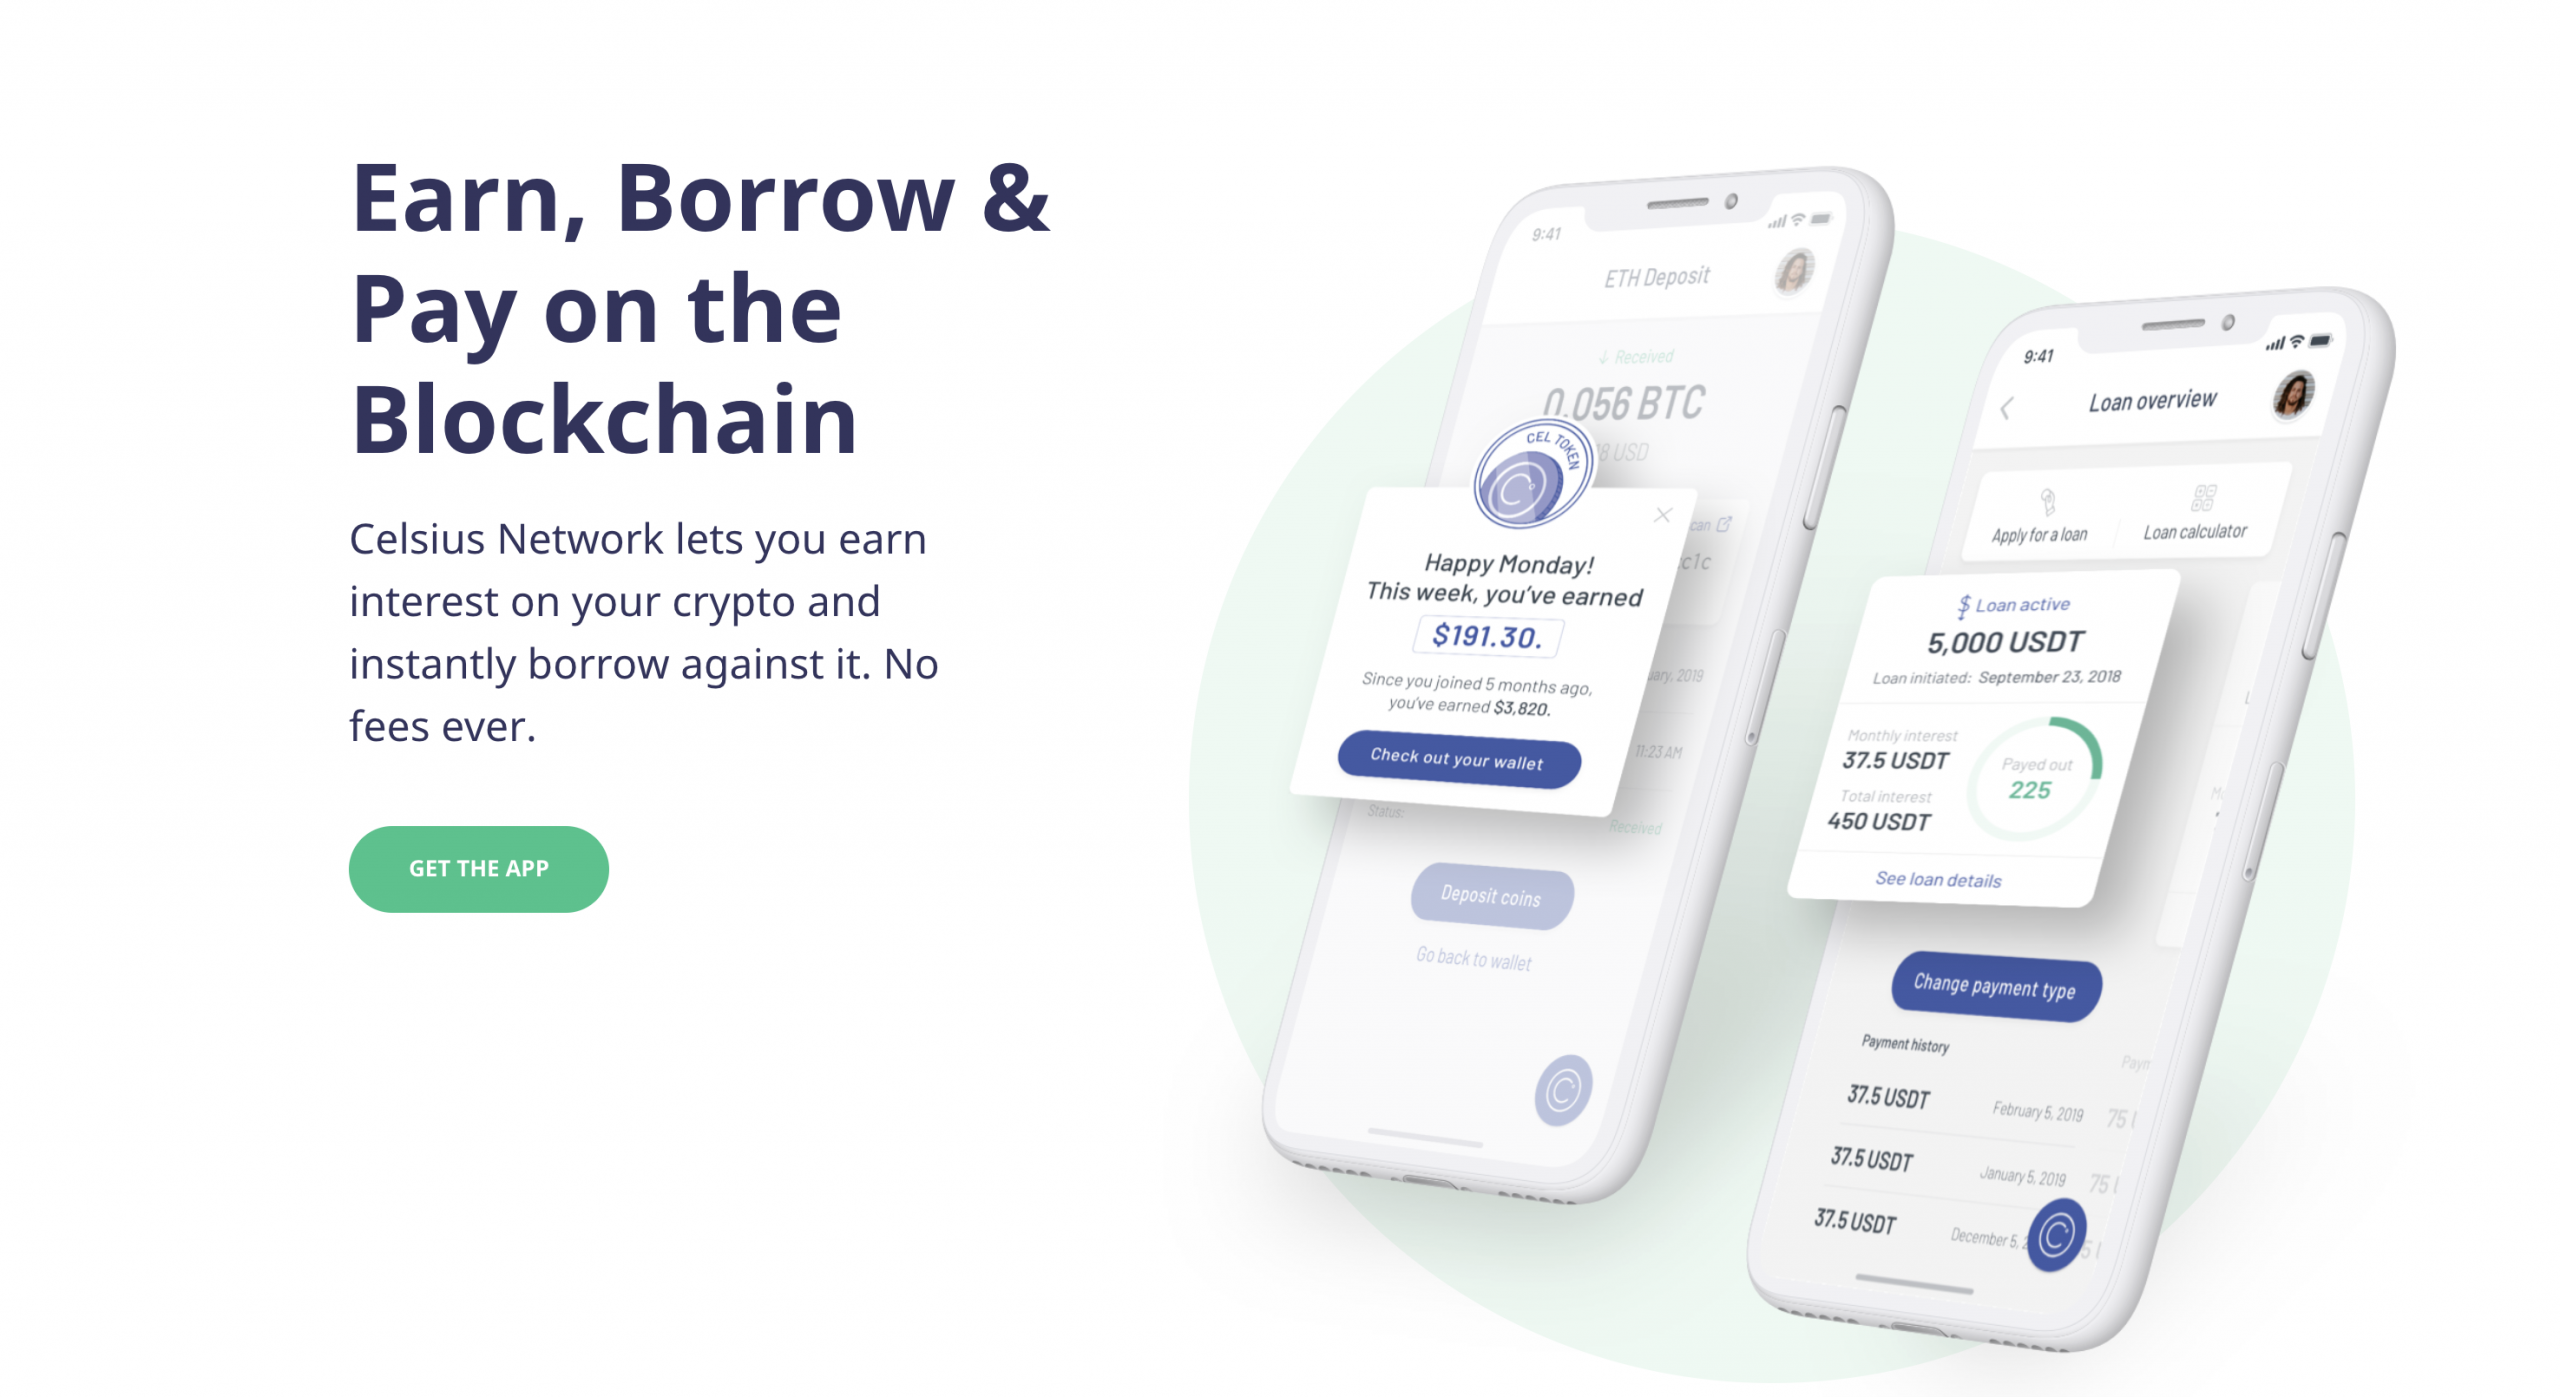 Celsius Network earn interest and borrow funds with cryptocurrency-backed loans